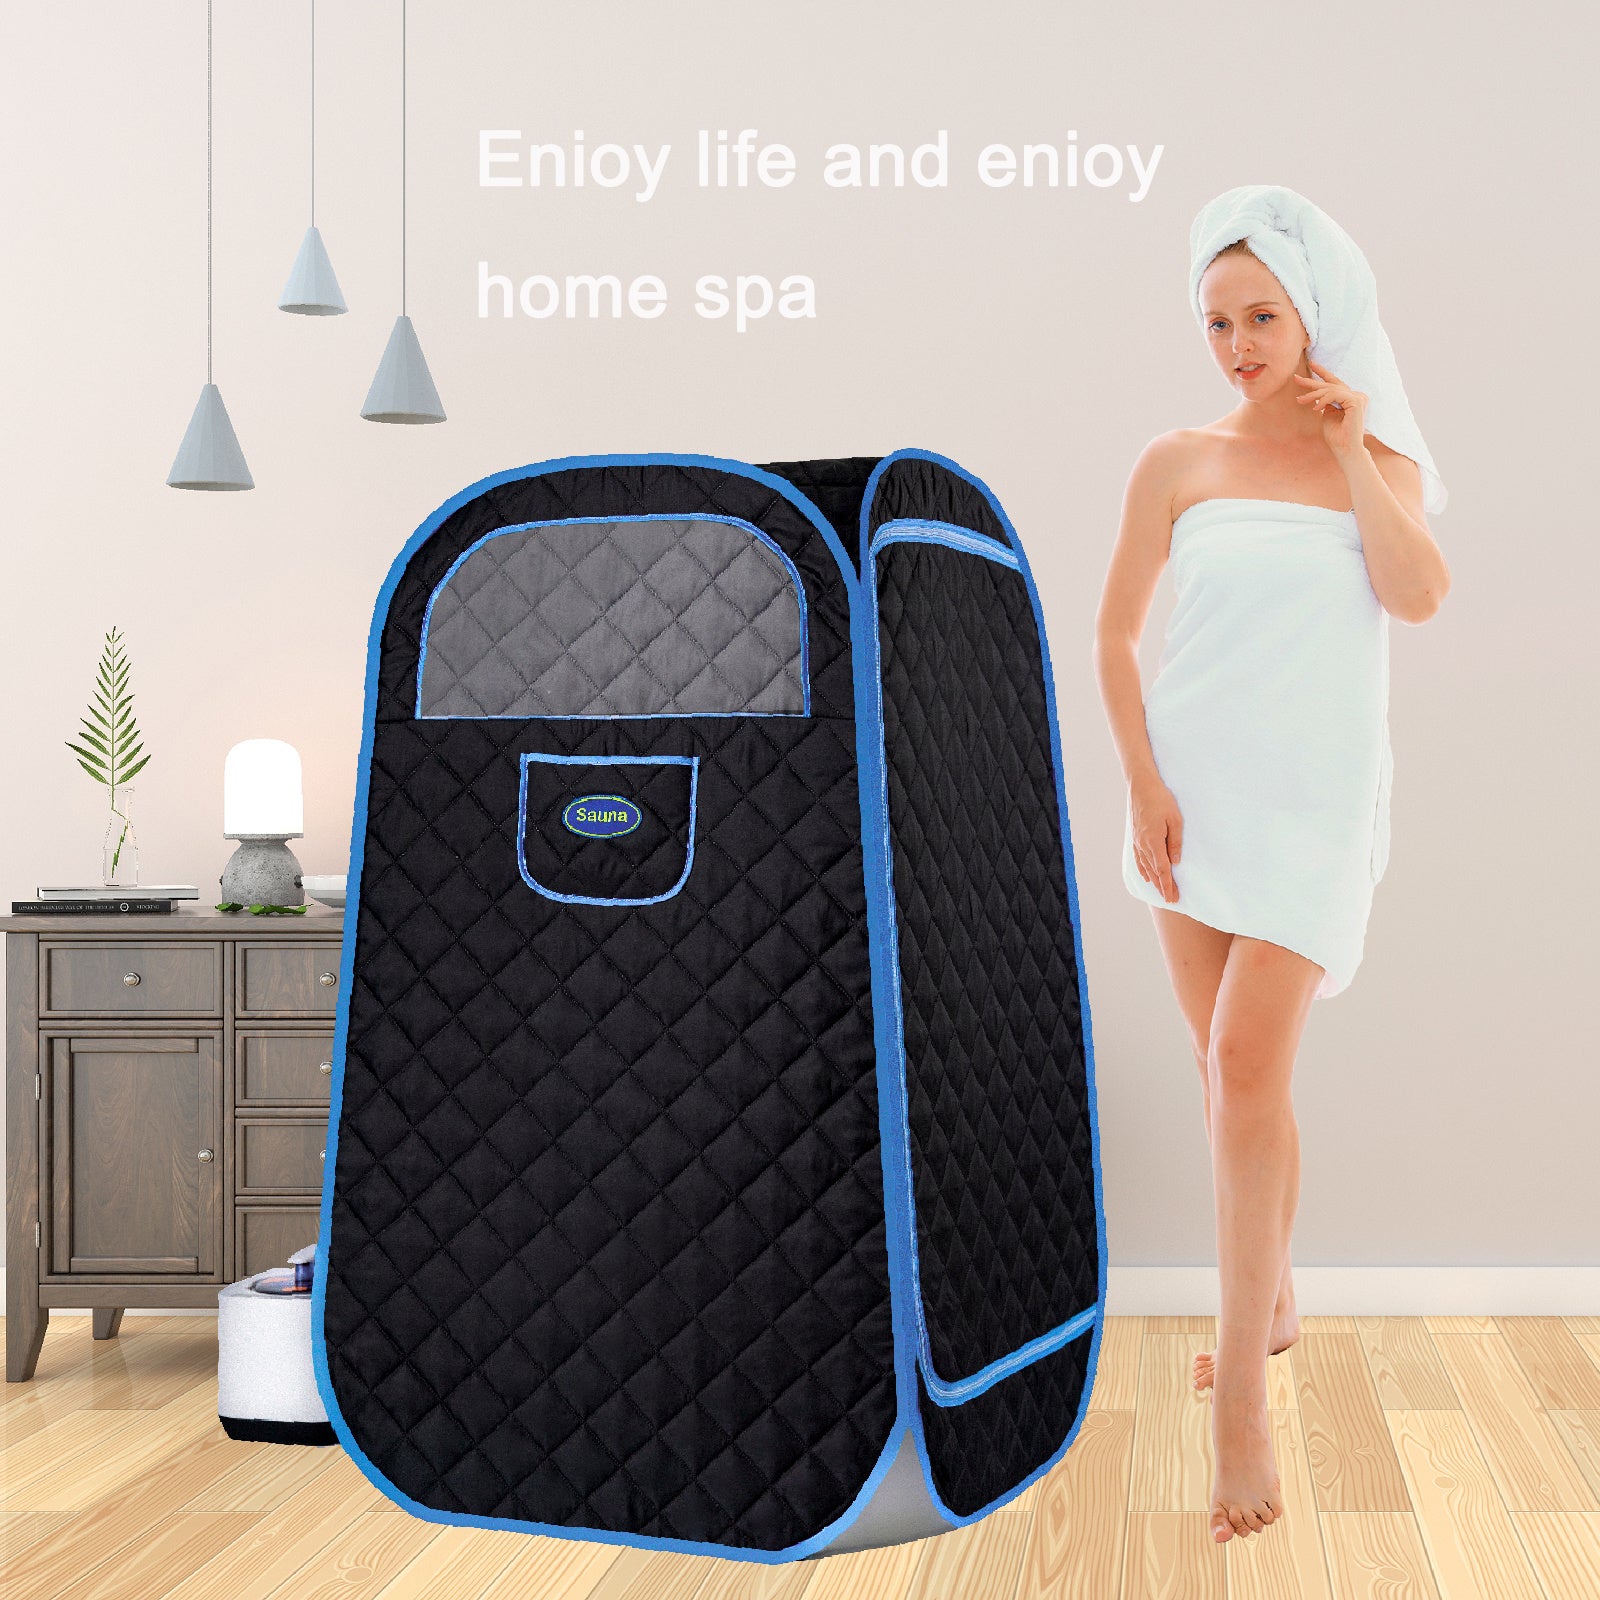 Image of the Portable Folding Full size Steam Sauna with 1000W&2.2L steam Generator